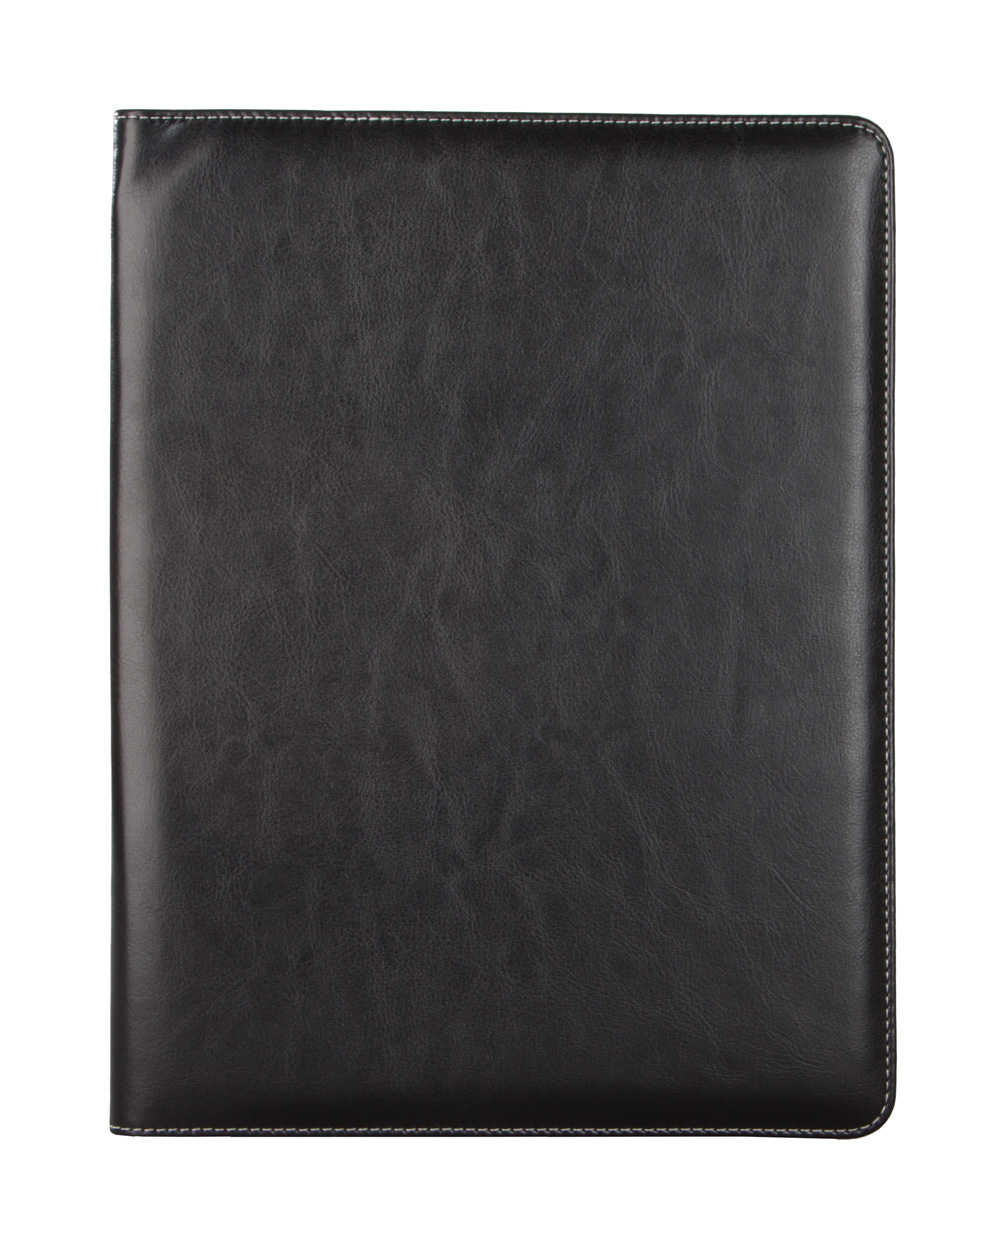 Conference folders PLANE A4 PU leather, A4 format - black